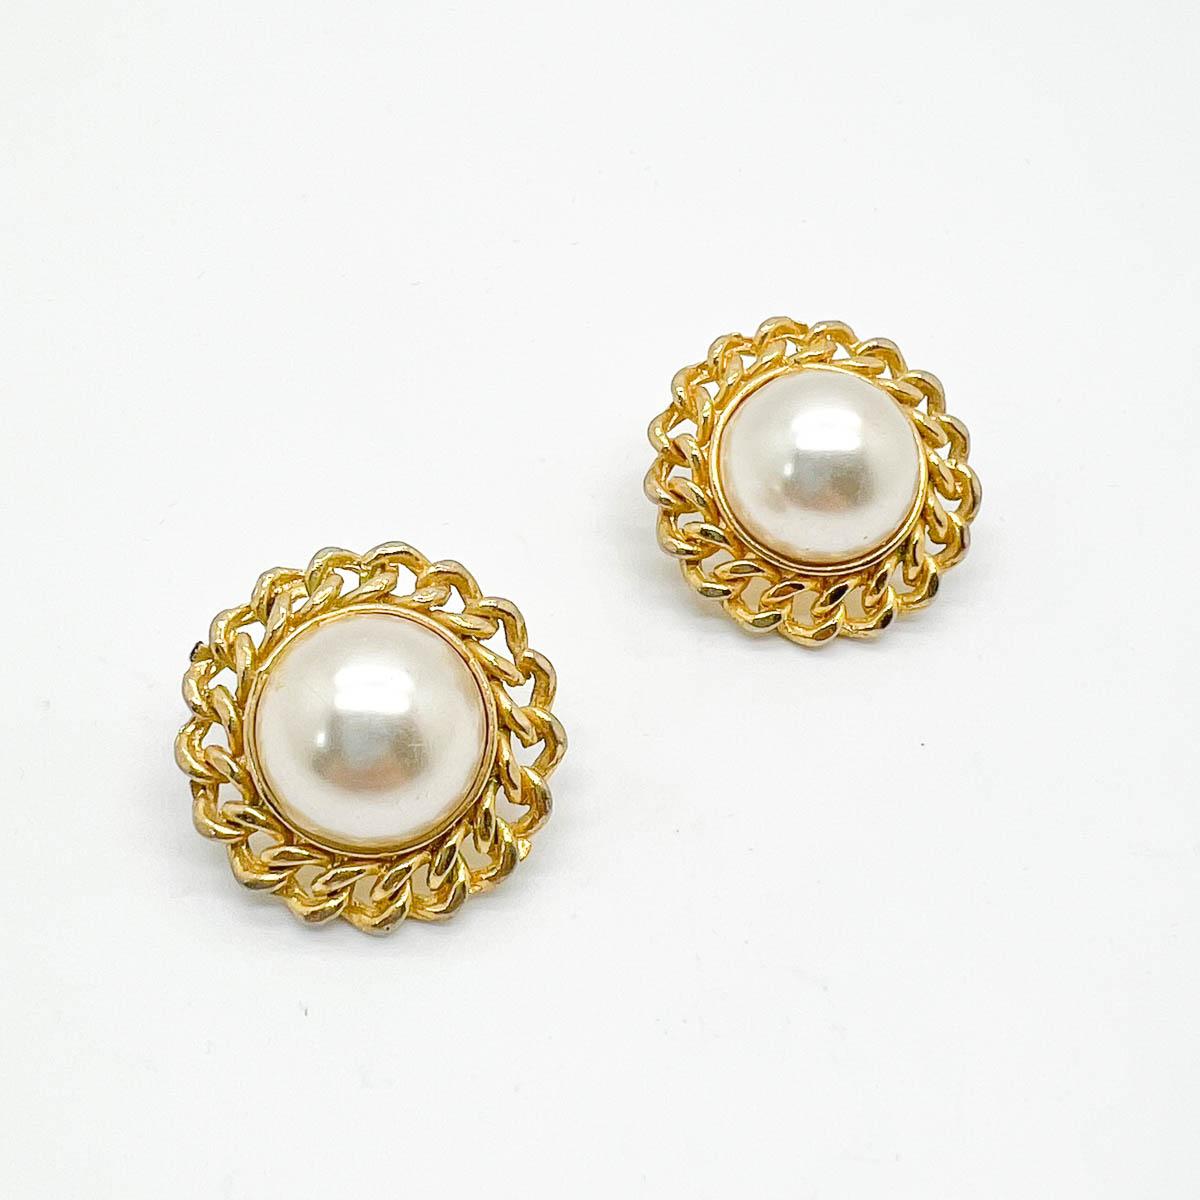 A pair of Vintage Pearl Rope twist earrings. Forever in style and a total jewel box hero.

An unsigned beauty. A rare treasure. Just because a jewel doesn’t carry a designer name, doesn’t mean it isn't coveted. The unsigned beauties in our